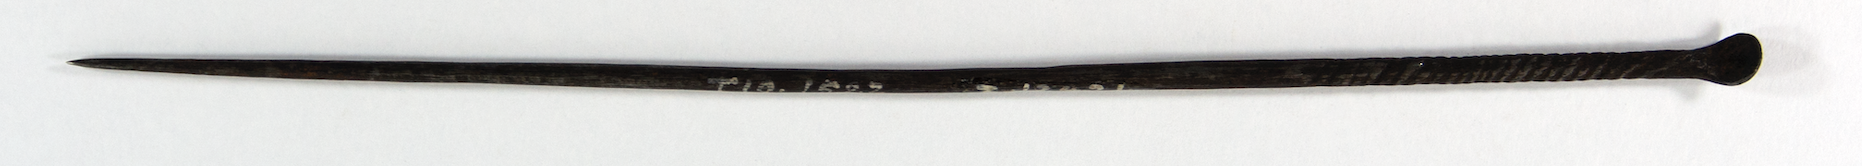 Long cylindrical rod of possibly iron. The head of the pin has been flattened into a small disc like shape, and the other end tapers to a very sharp point.